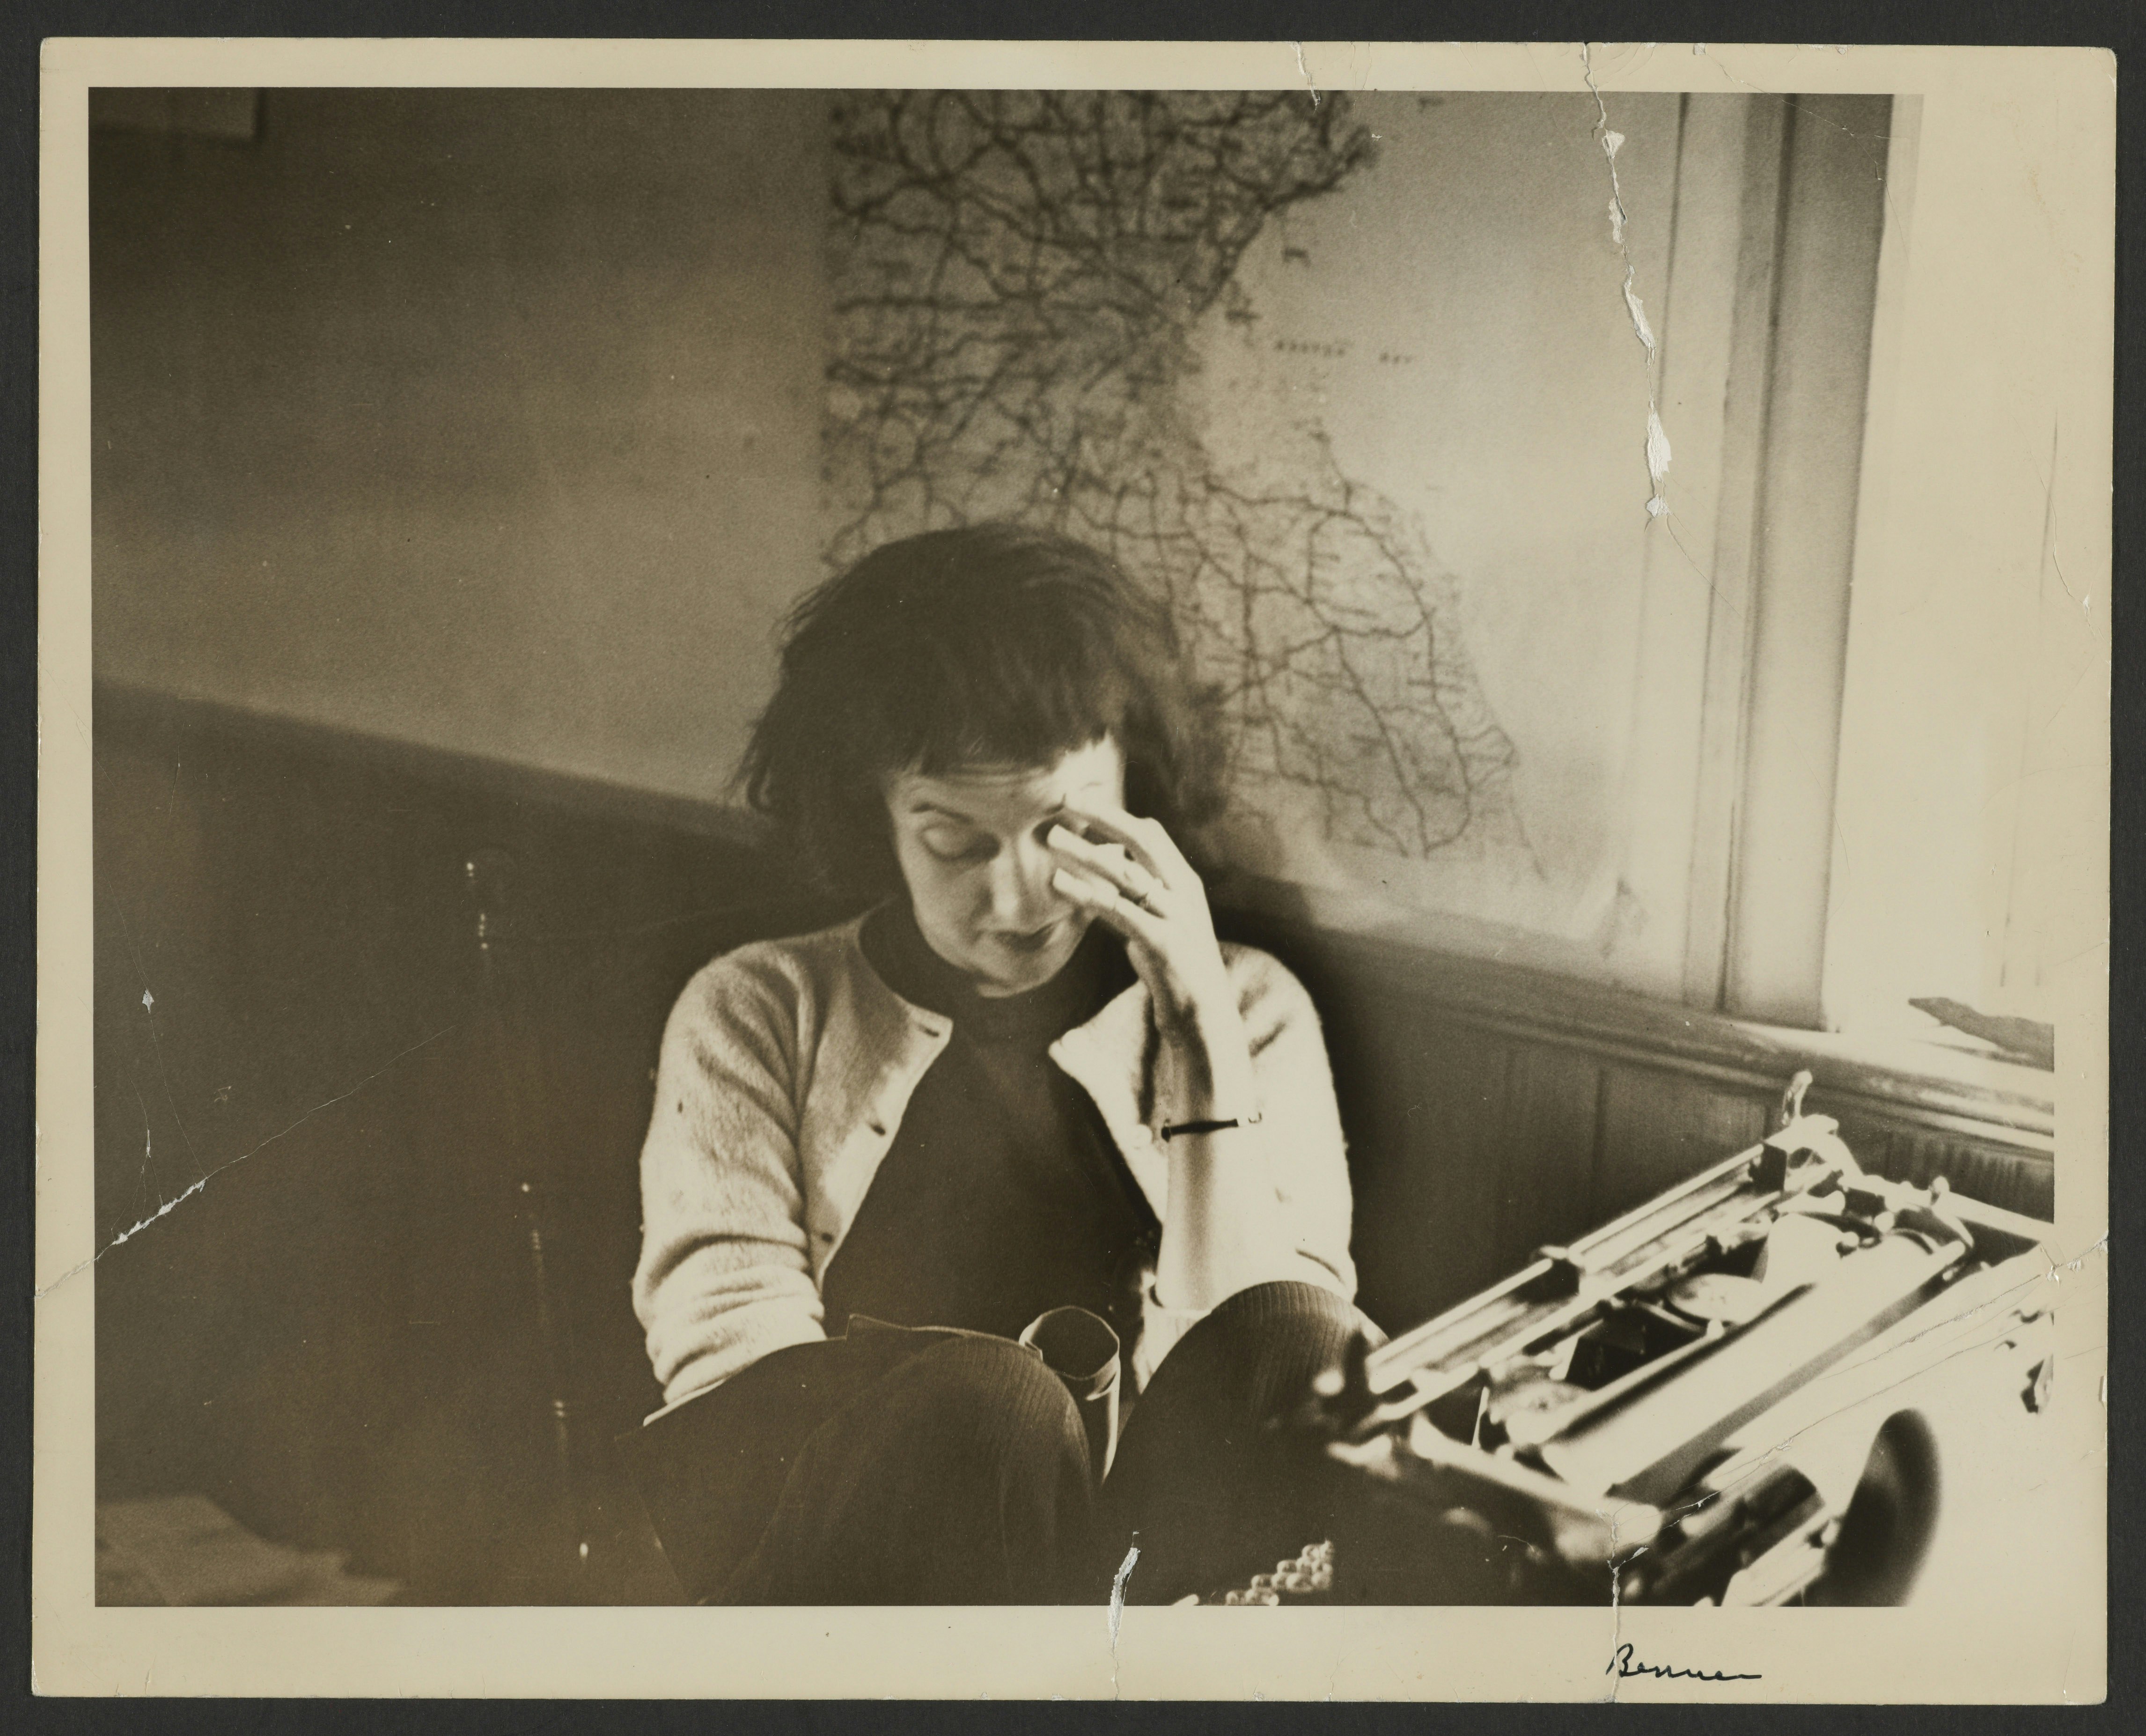 Portrait of Betty Friedan working at a desk with a typewriter